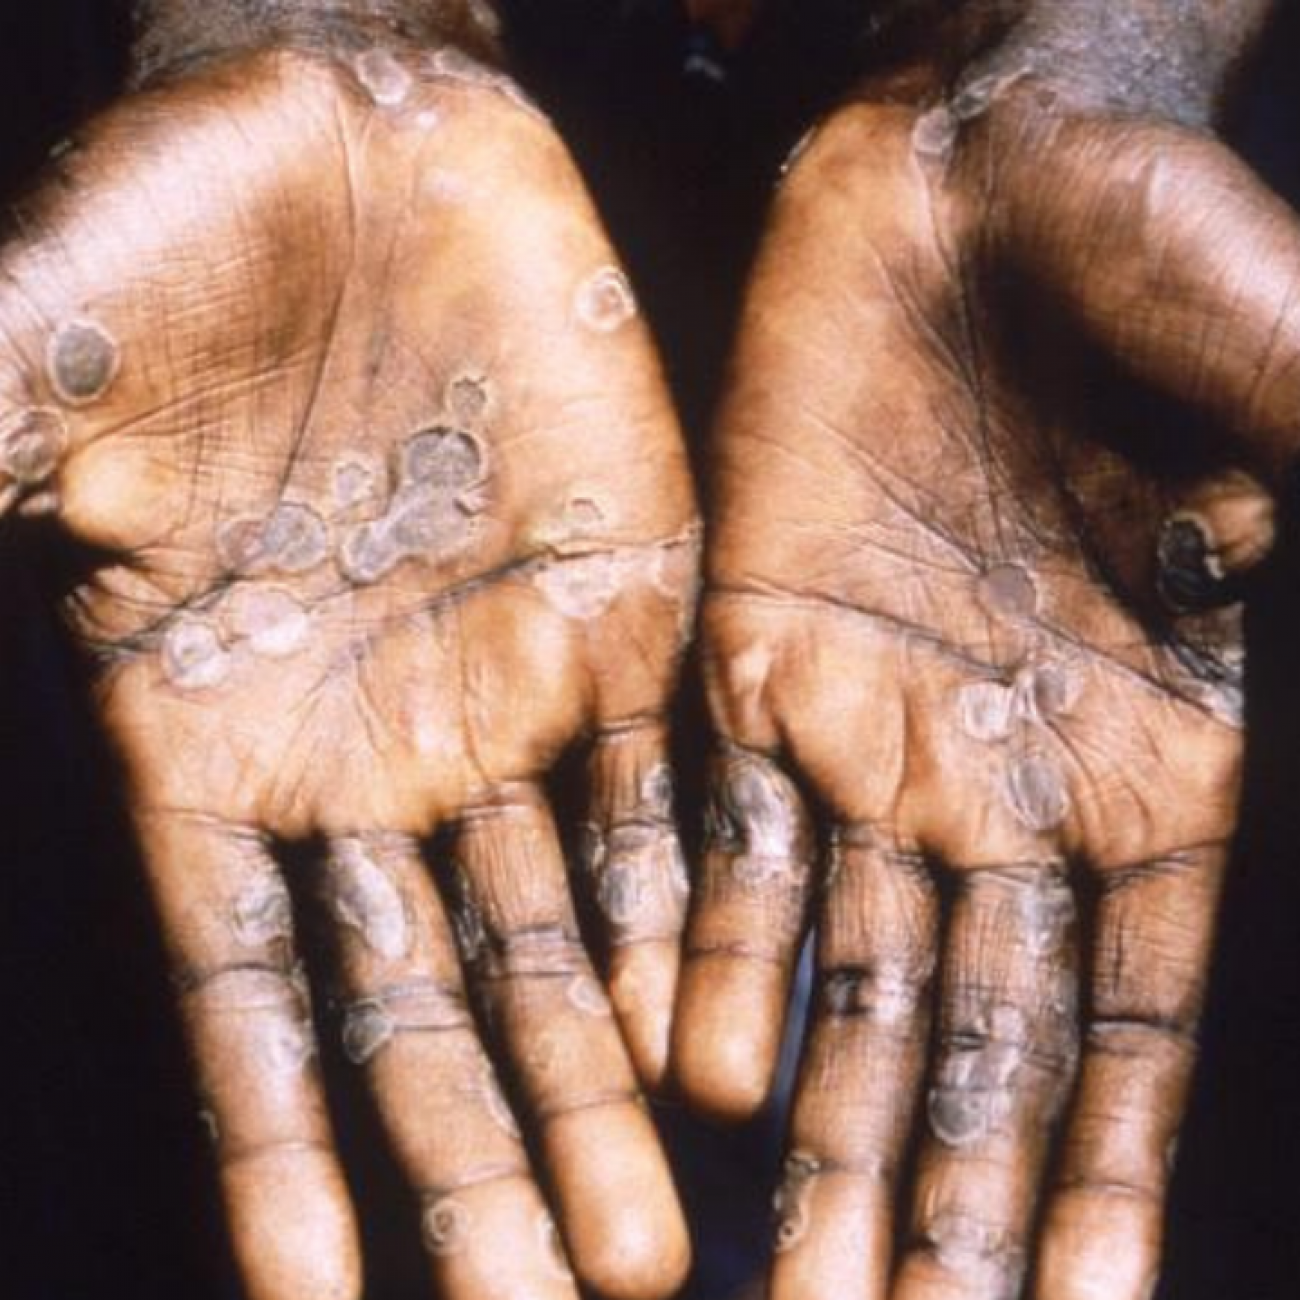 The palms of a person suffering from monkeypox show small circular shaped welts. The rash is strikingly similar to a smallpox rash.